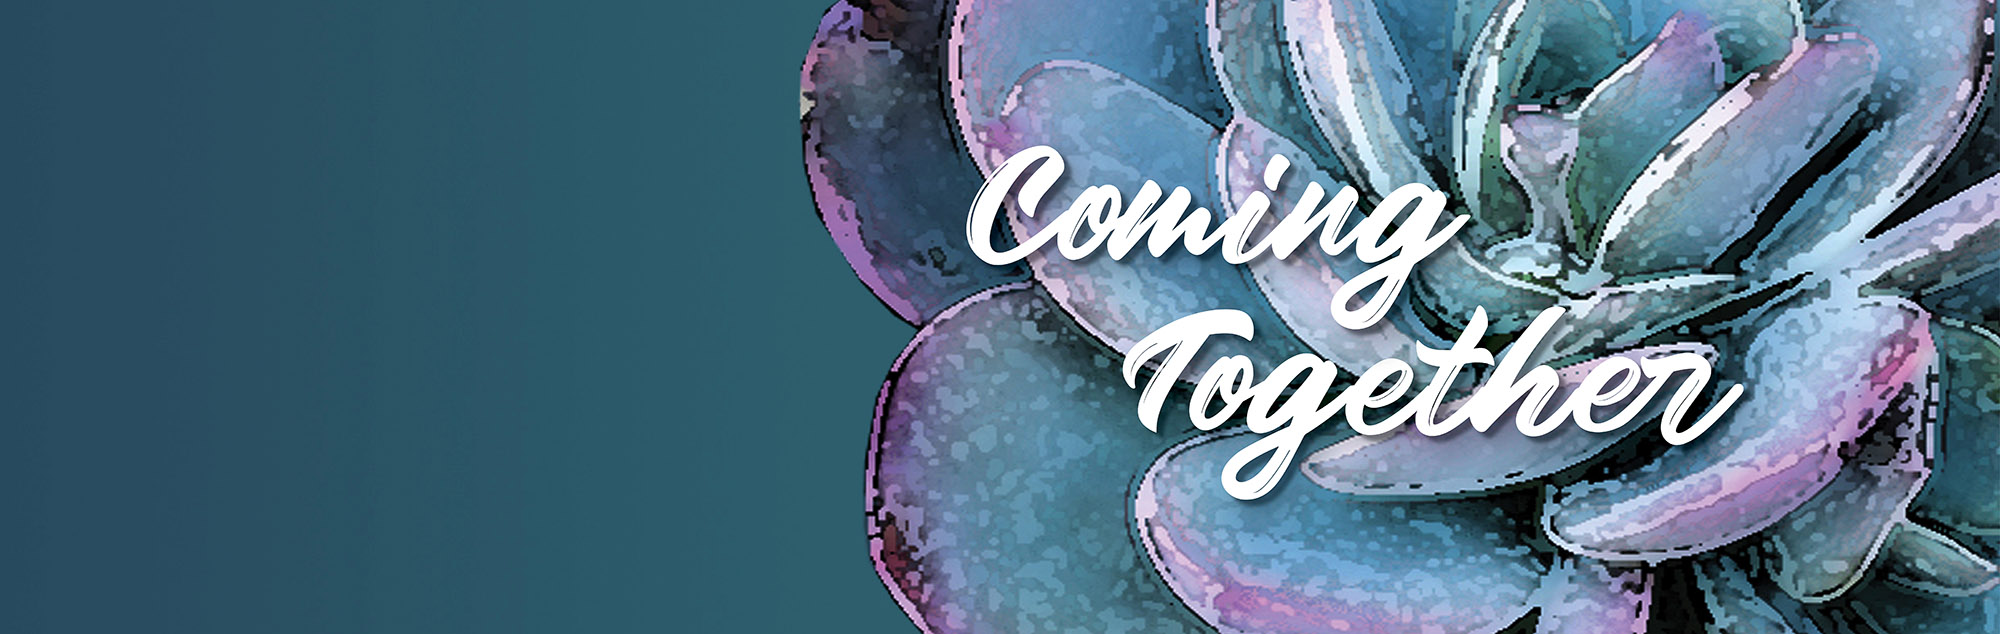  Coming Together - background image of a succulent plant 